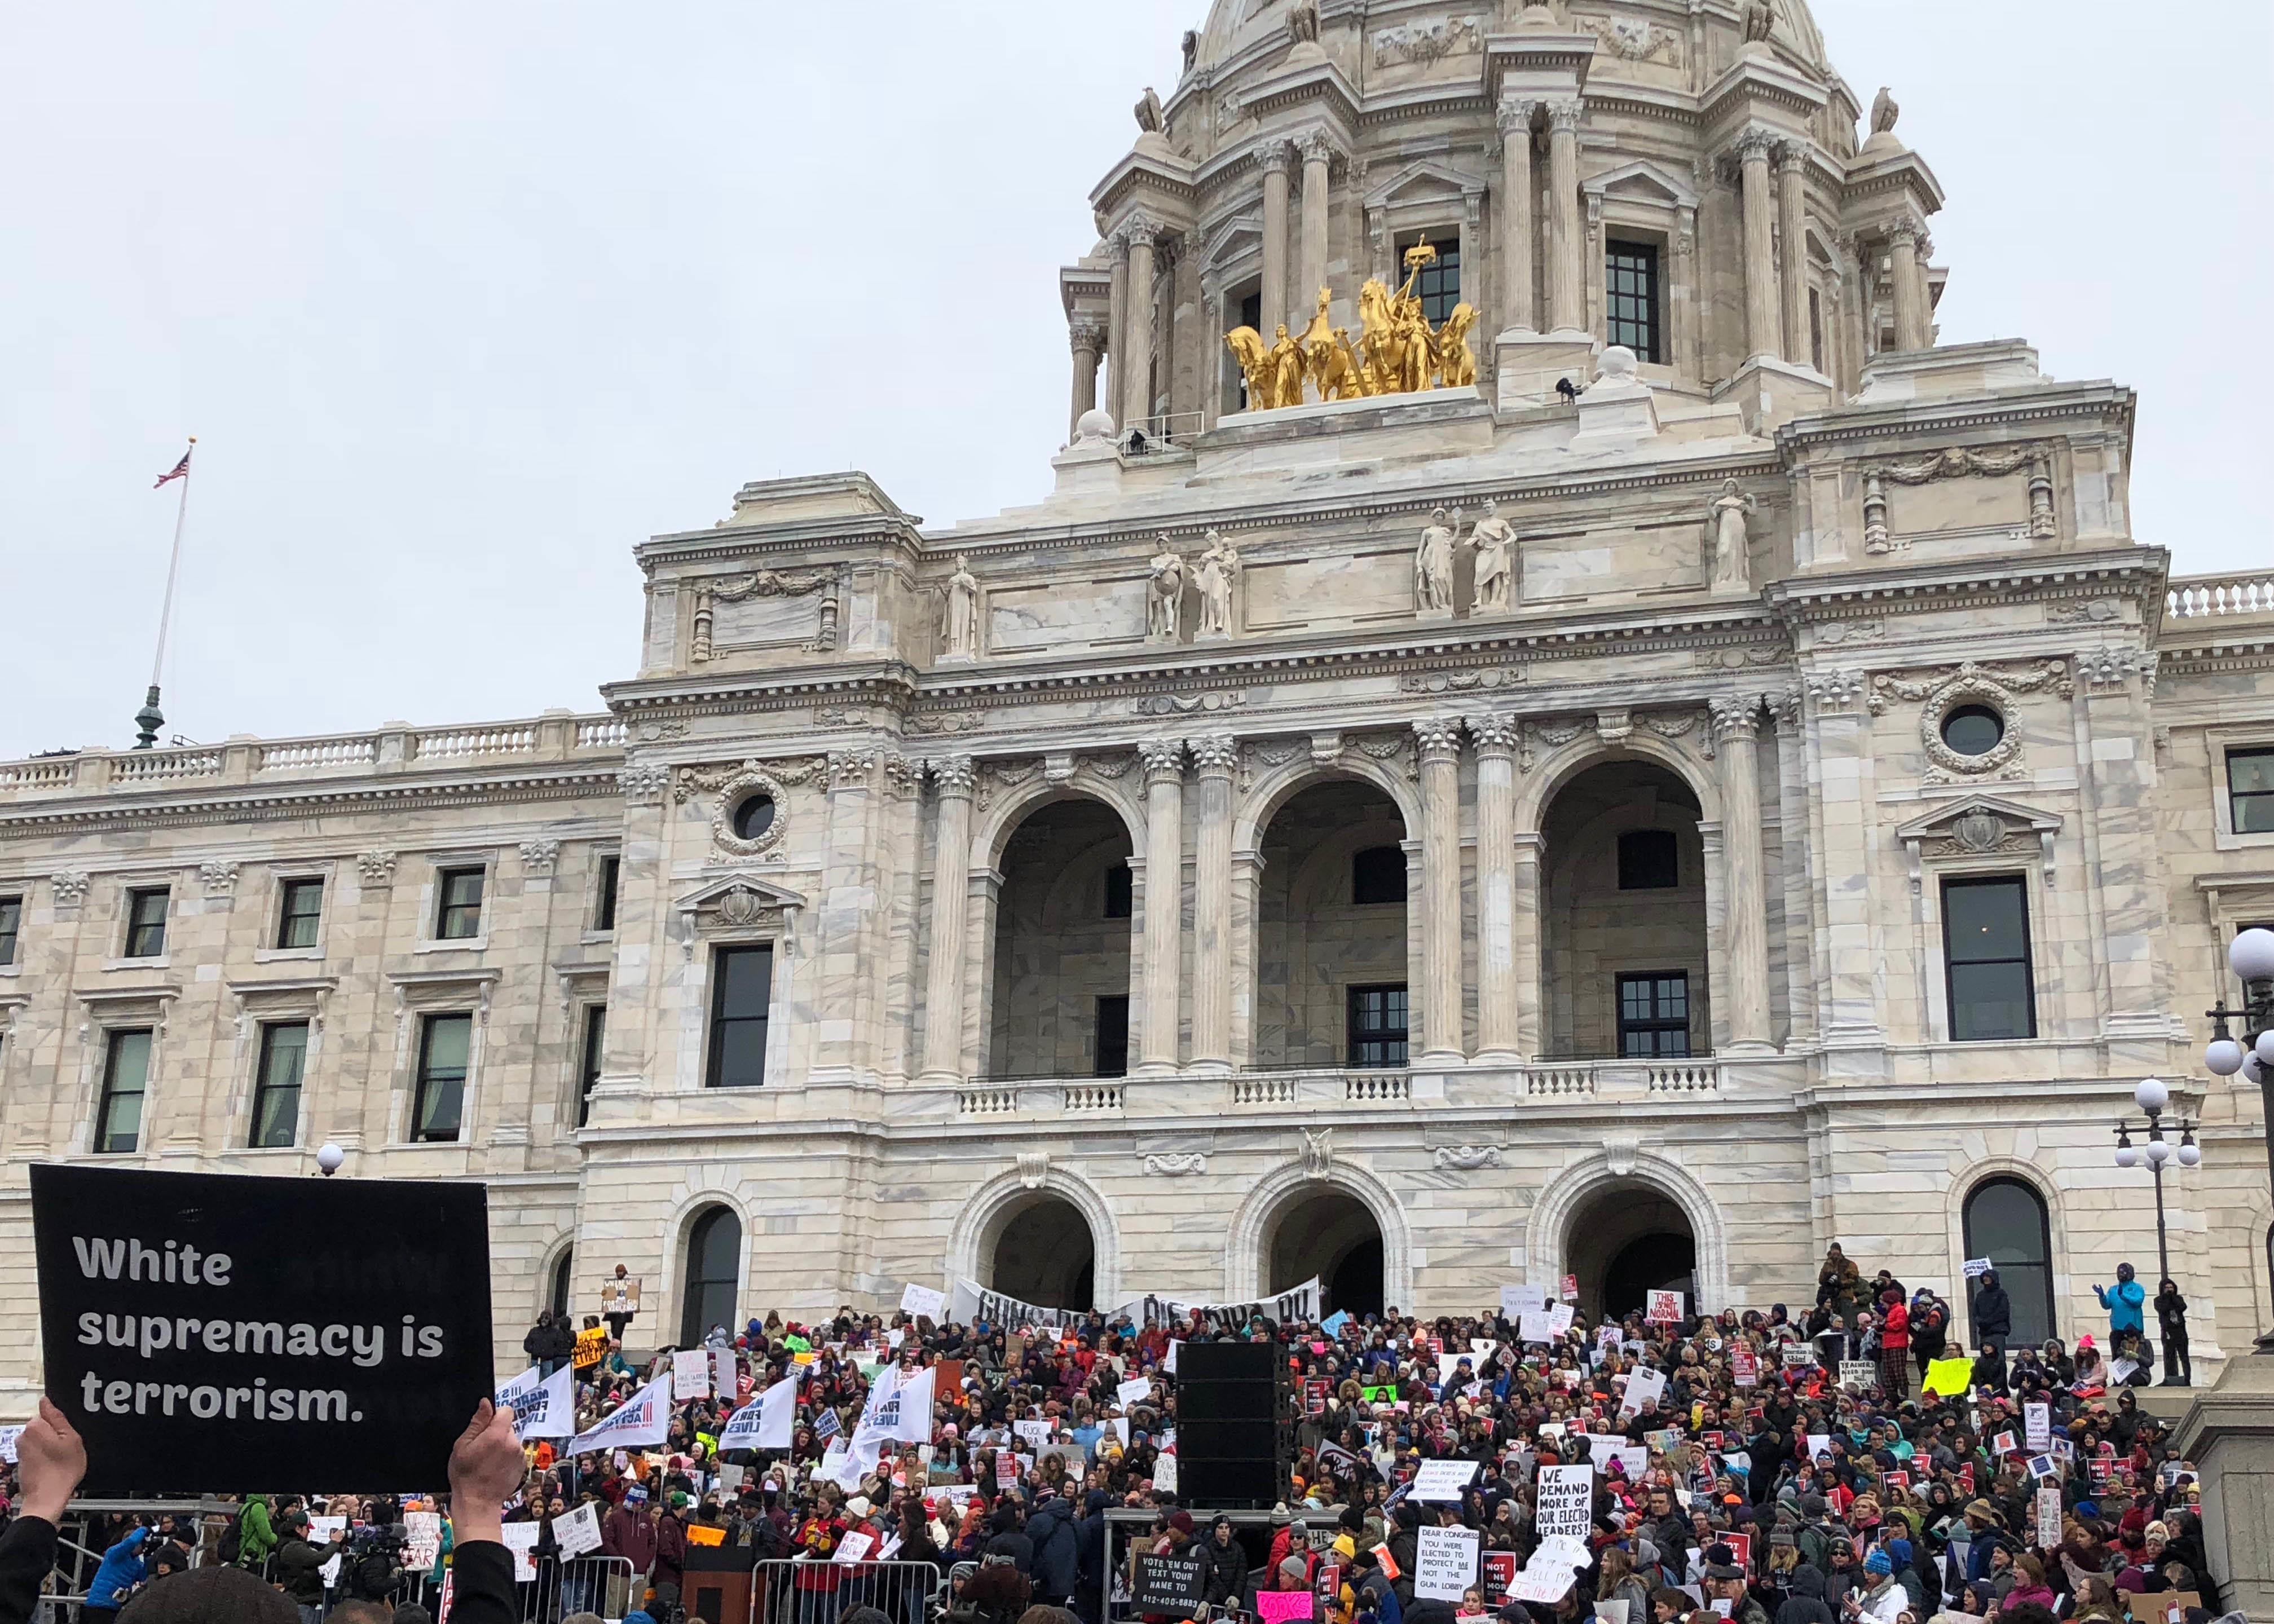 Protestors in front of the St. Paul Capitol building